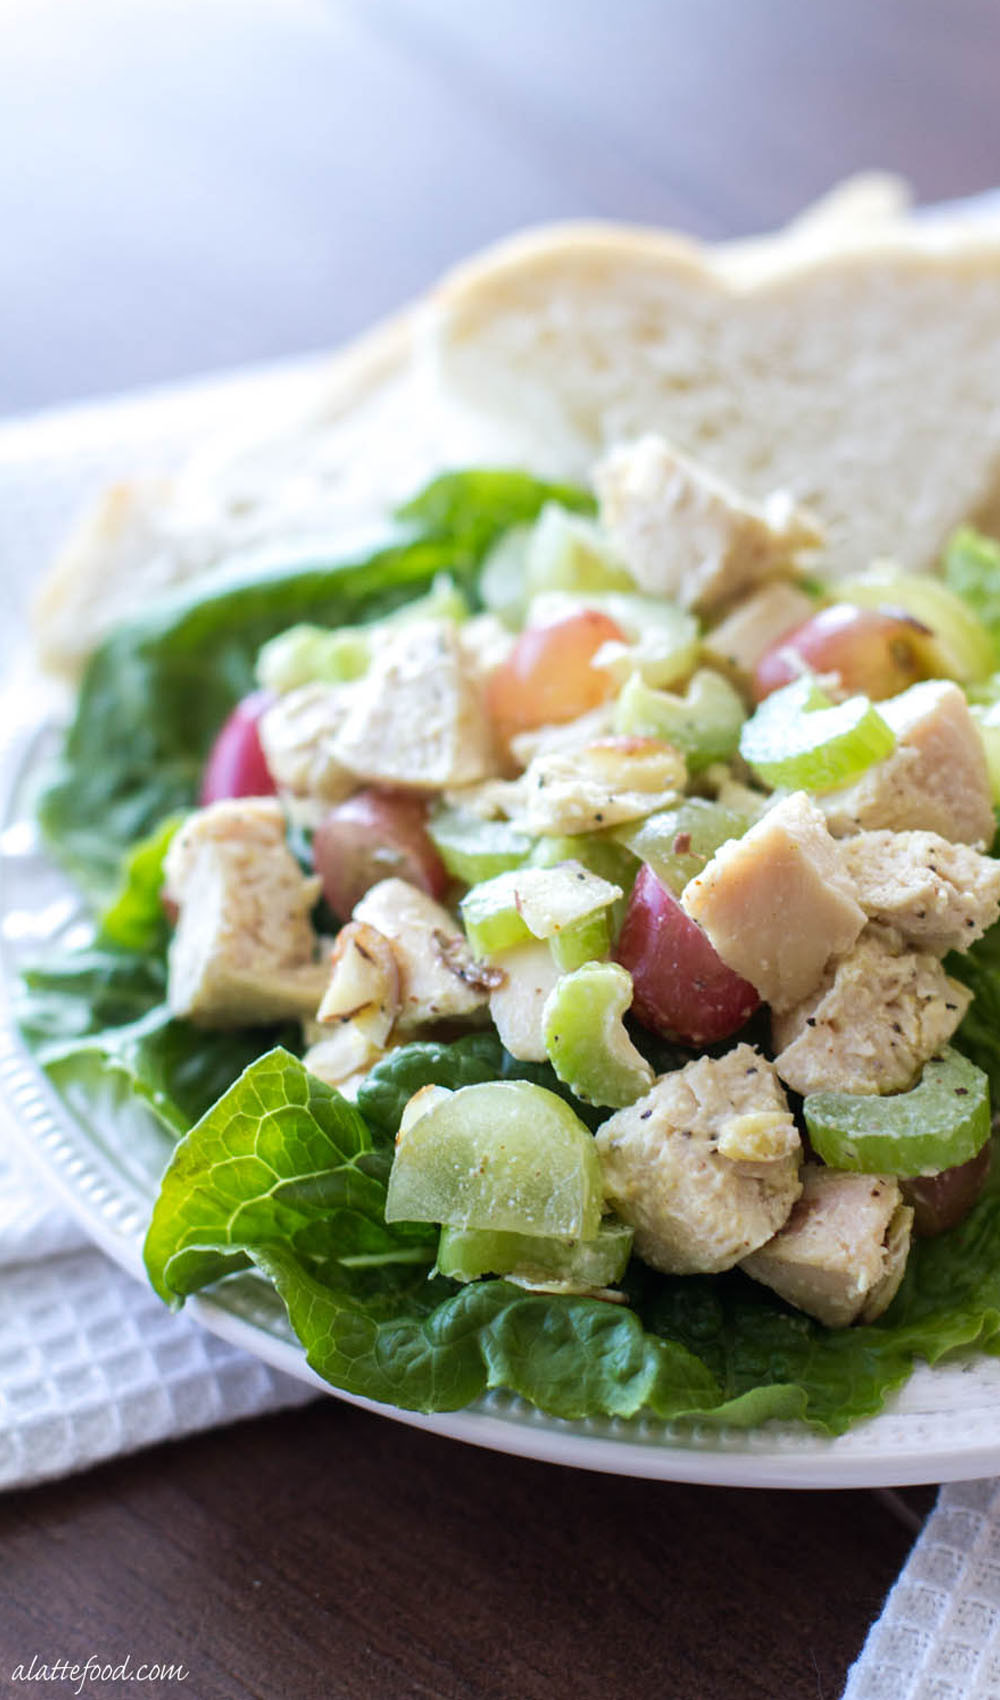 Recipes For Chicken Salad
 Light and Healthy Chicken Salad Recipe